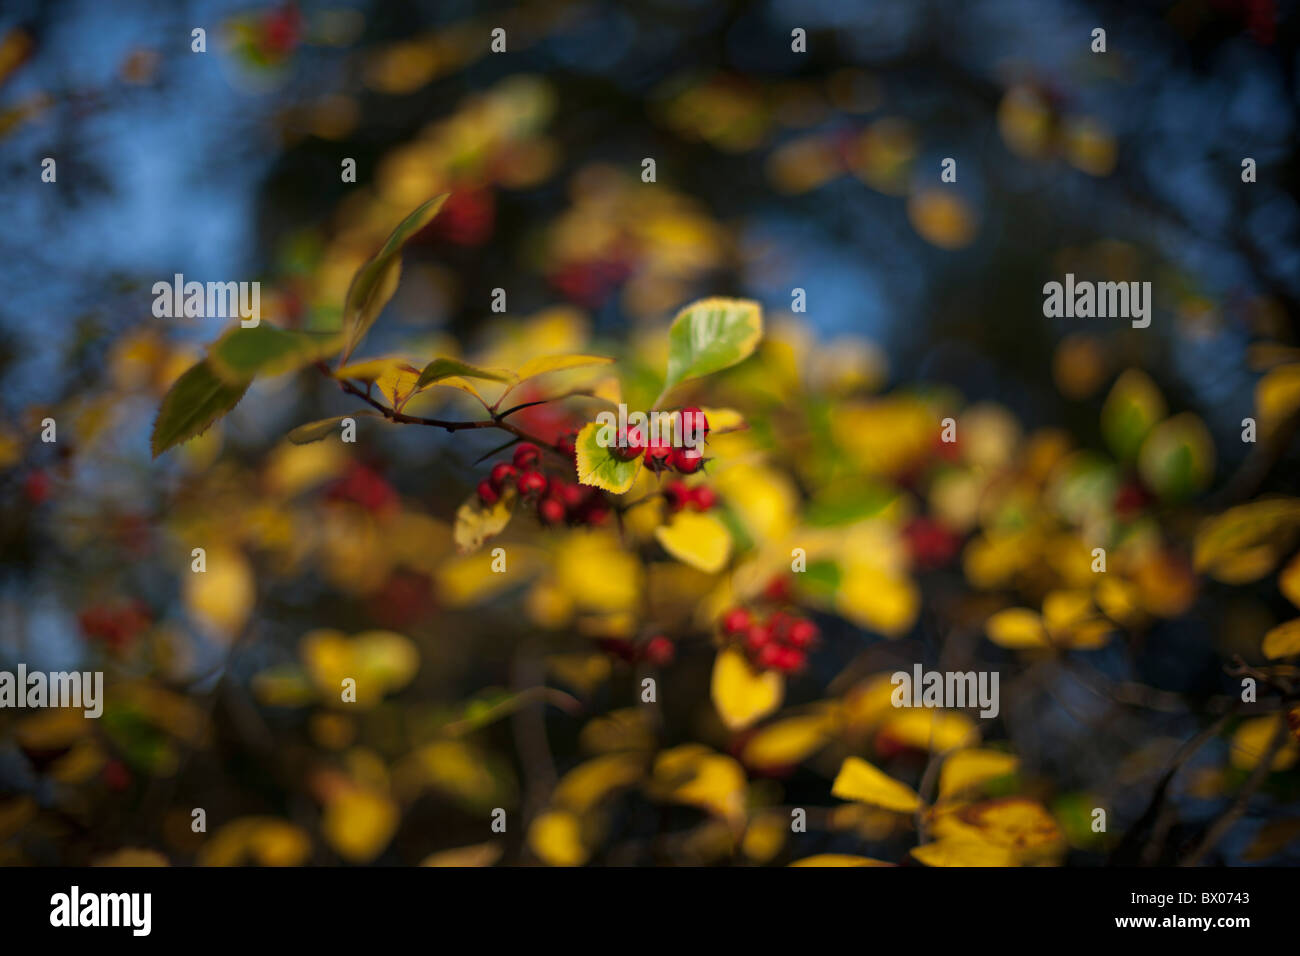 Fall Berries on green and yellow bush, photographed in Berlin Germany Stock Photo